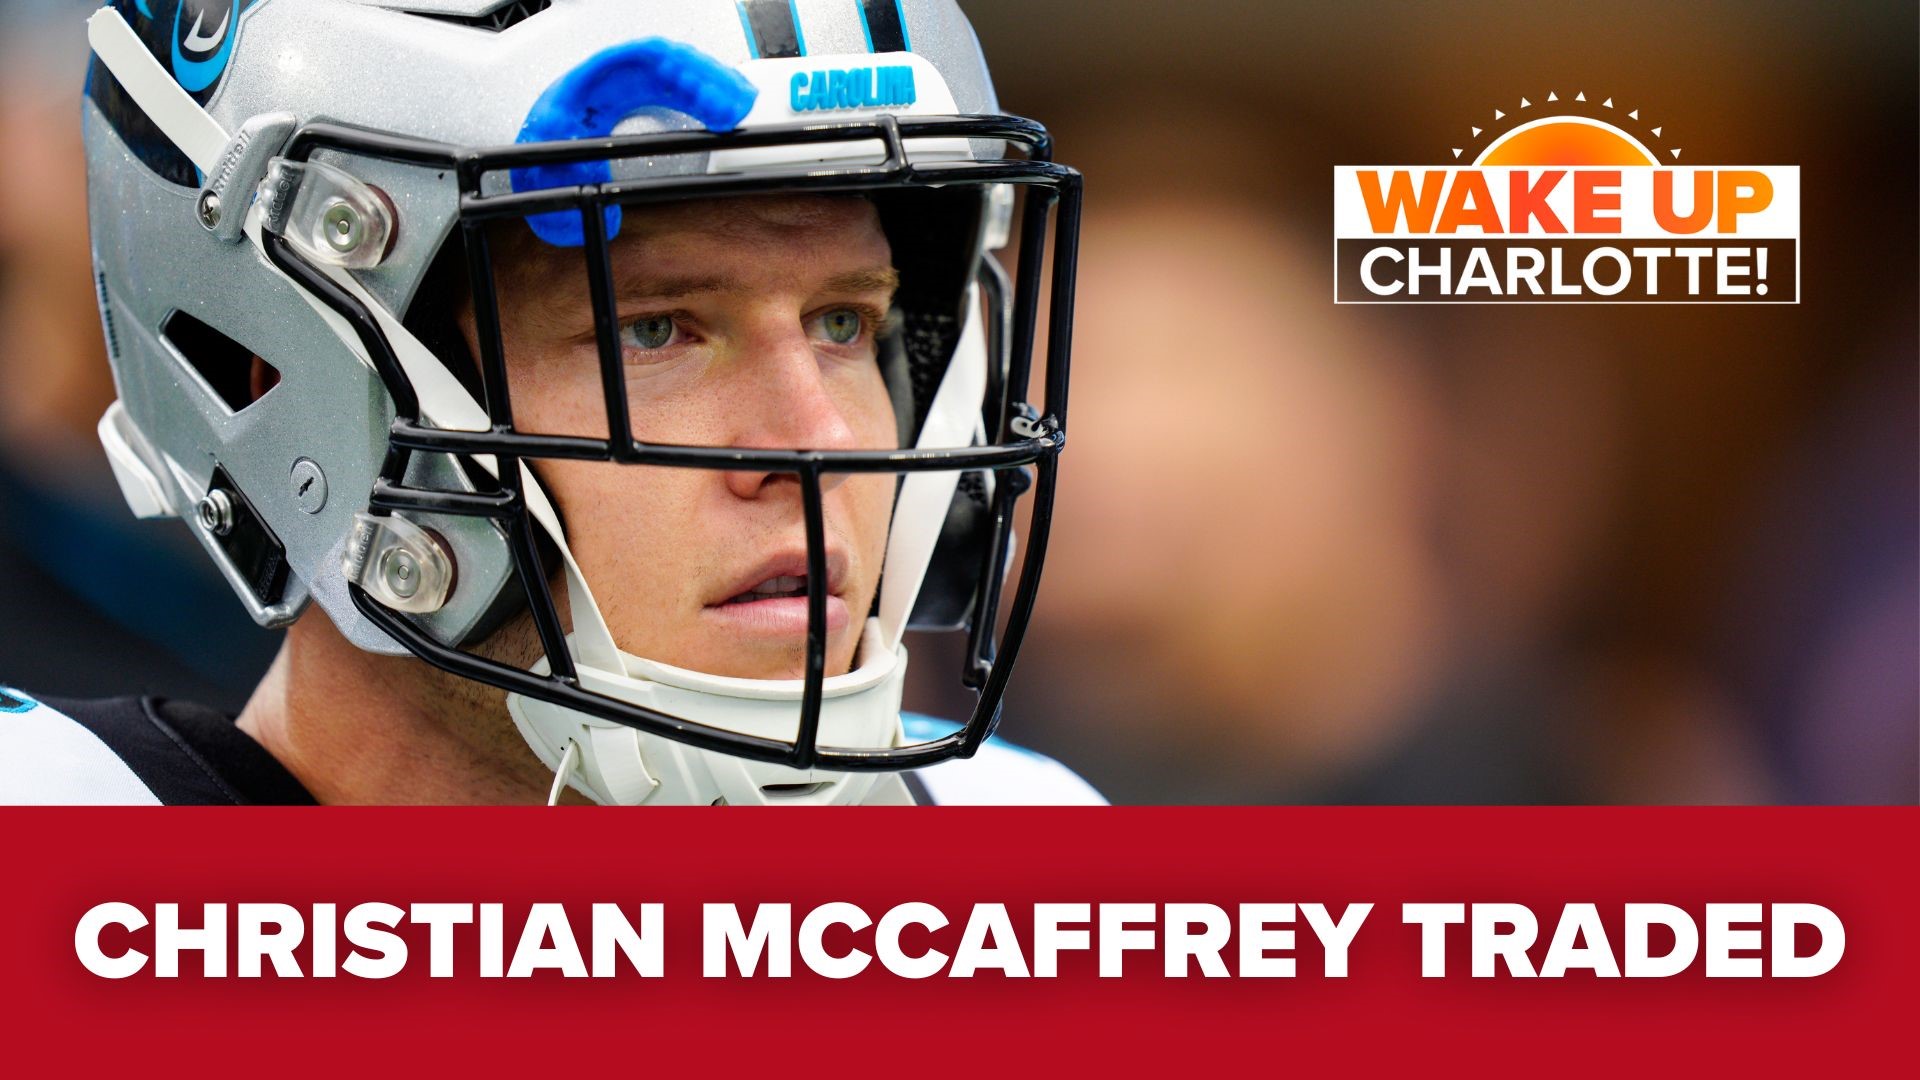 The Carolina Panthers traded former All-Pro running back Christian McCaffrey to the San Francisco 49ers for future draft picks.